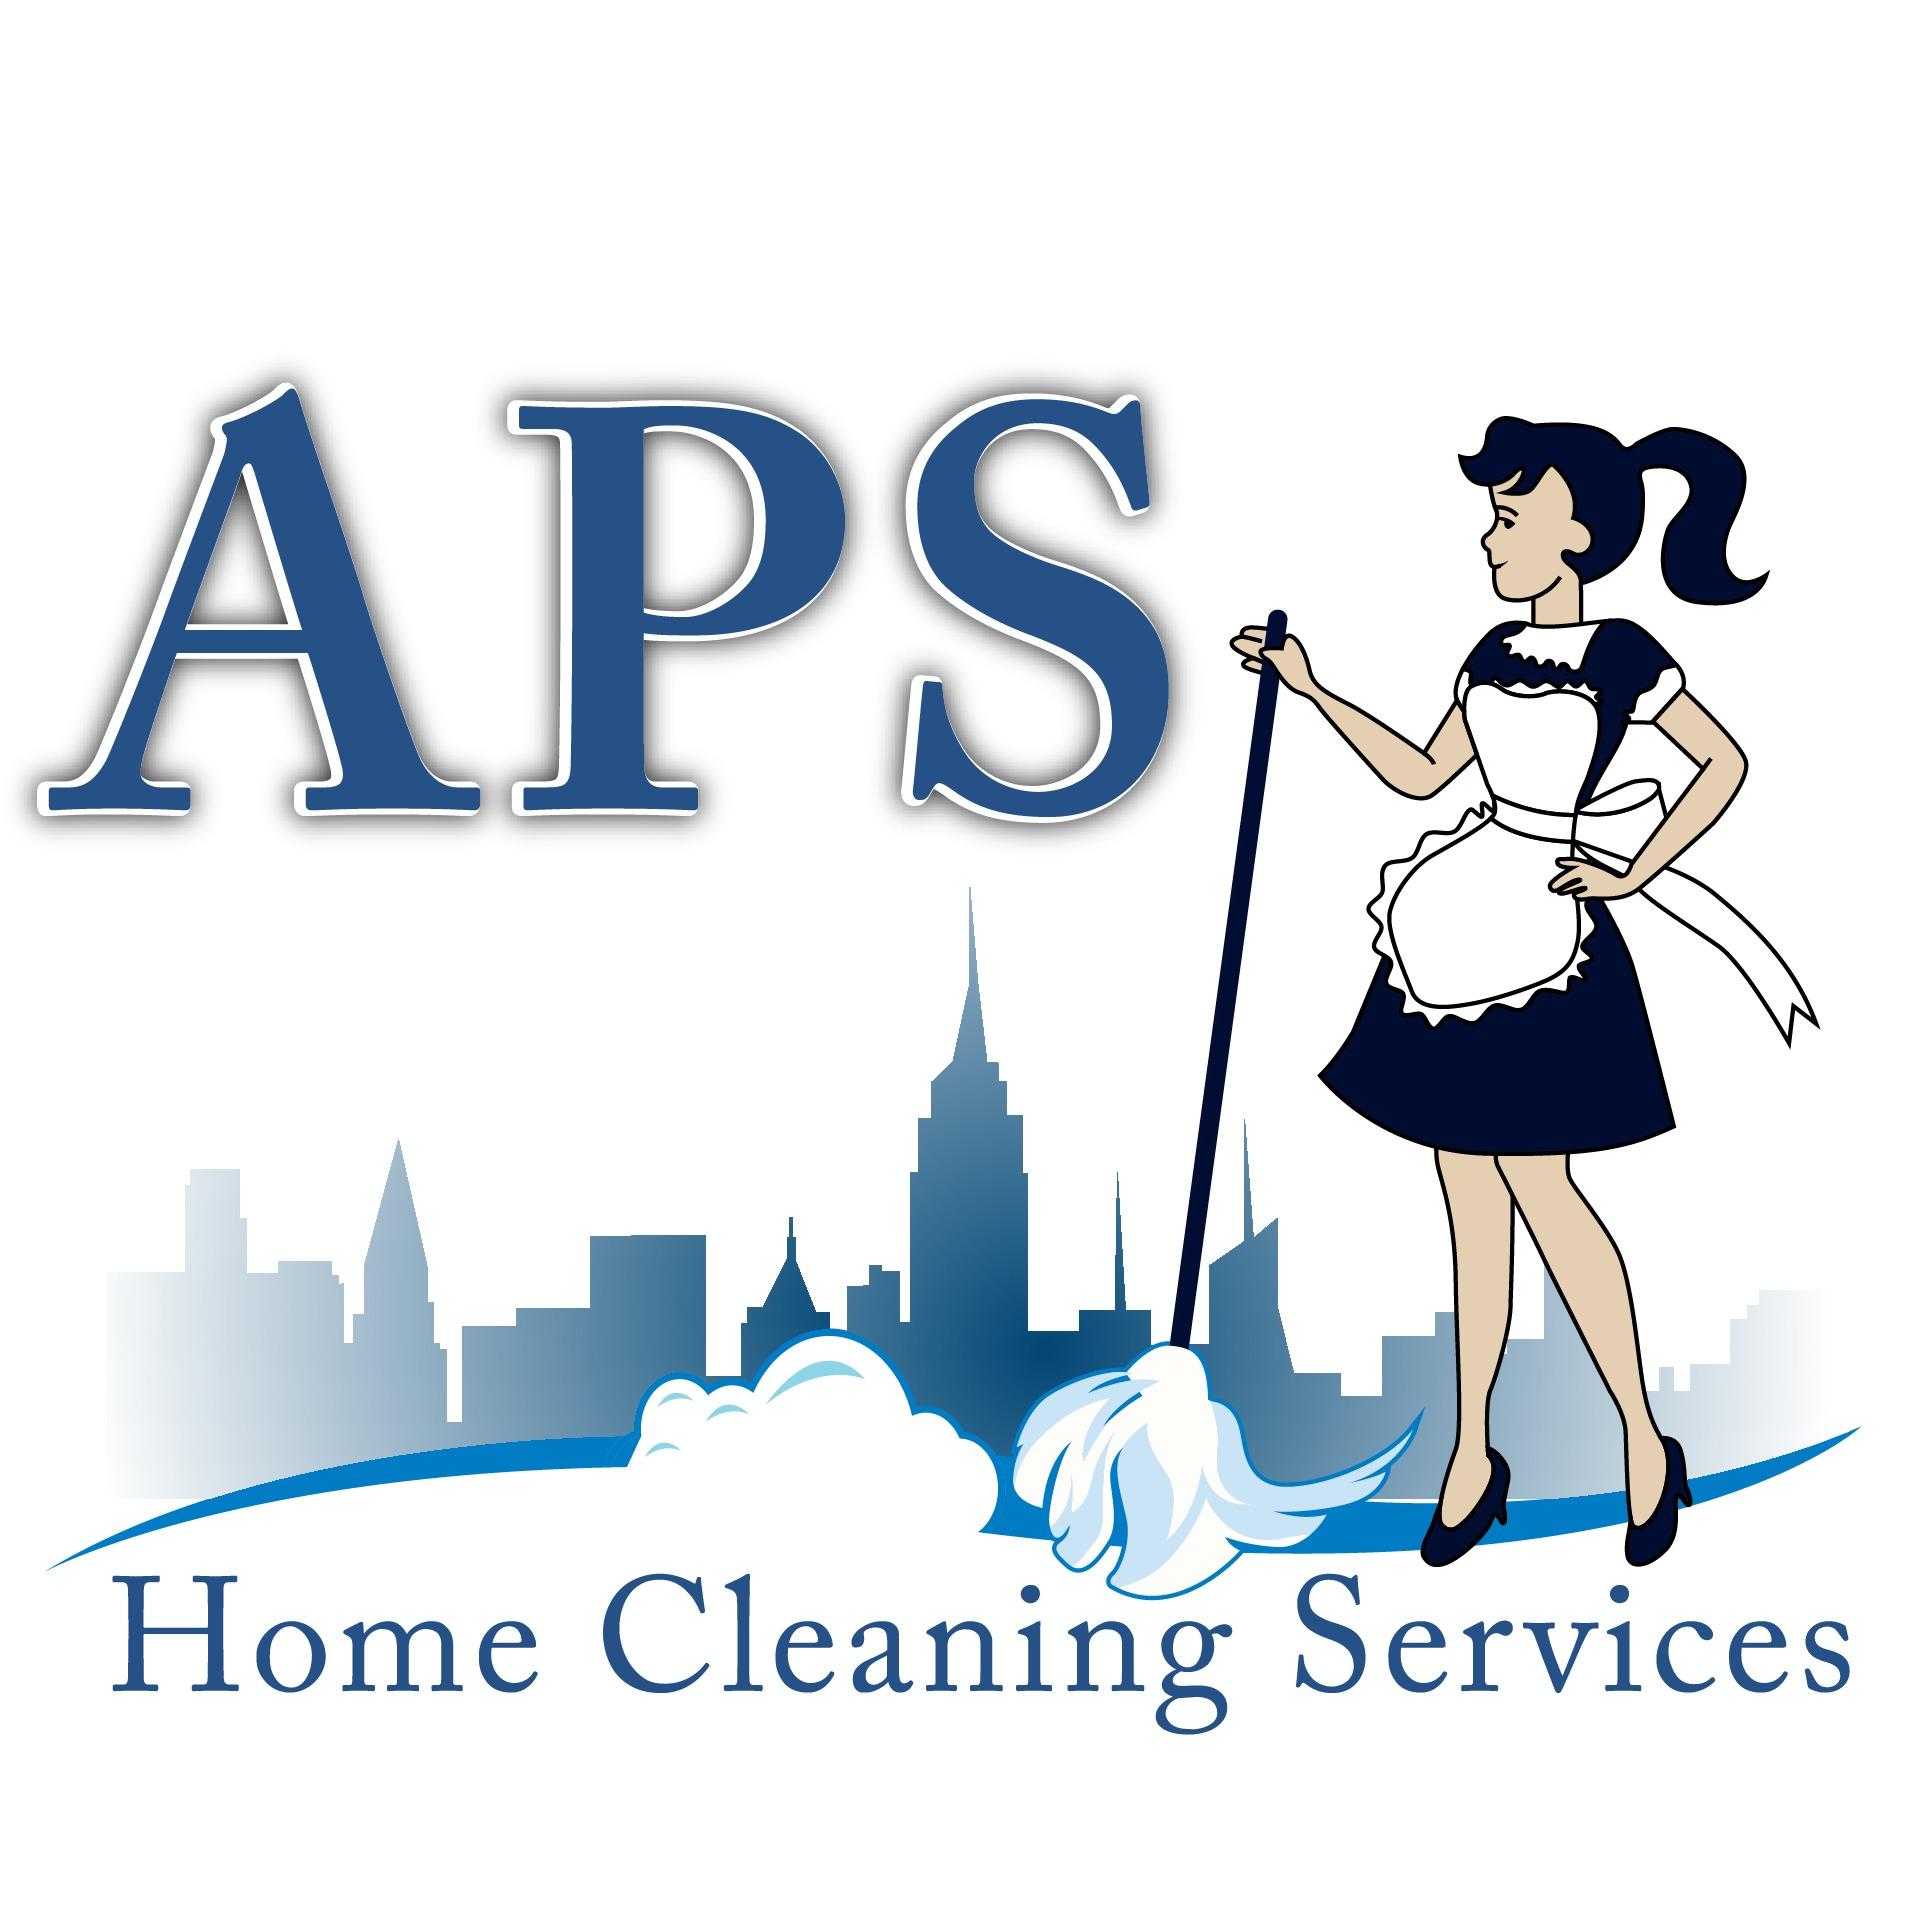 APS Home Cleaning Services Photo